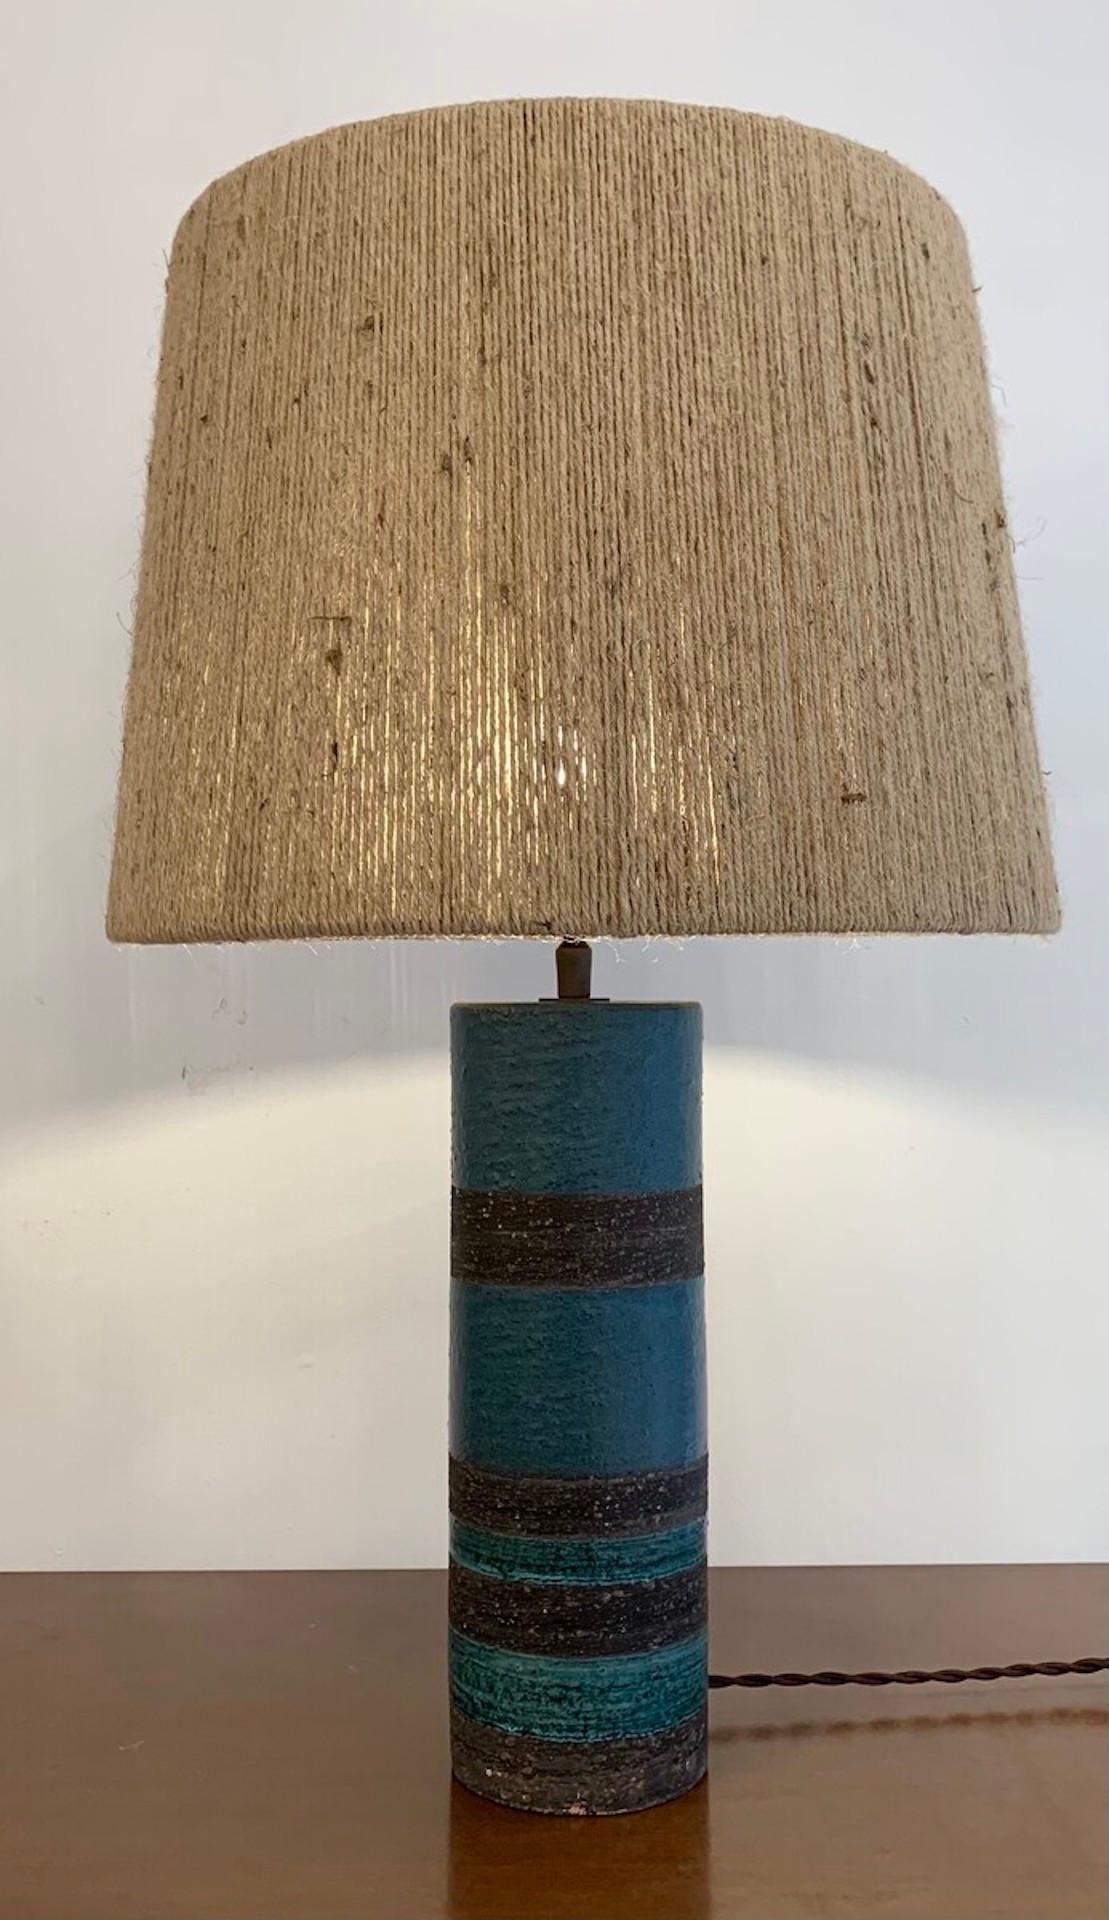 Mid-Century Modern blue ceramic table lamp by Bitossi - Italy 1960s
New rope lampshade.